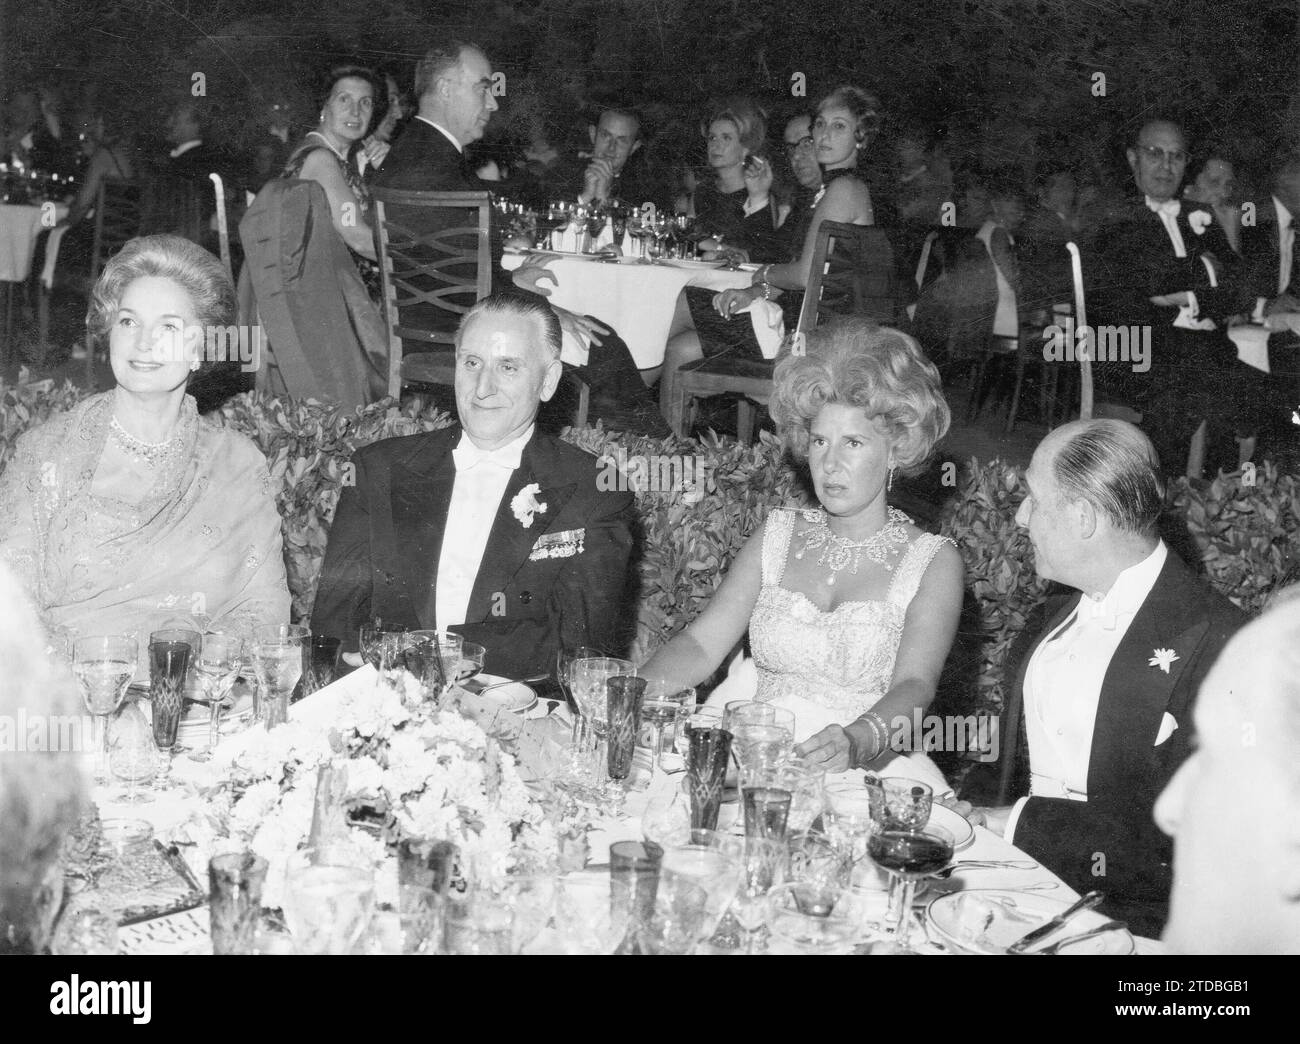 IV gala of the Spanish silk industry, held in Barcelona. In the Image, from left to right, Begum Aga Khan, the mayor of Barcelona, José María Porcioles, the Duchess of Alba and the mayor of Madrid, José Finat Approximate date: October 1963. Credit: Album / Archivo ABC / Álvaro García Pelayo Stock Photo